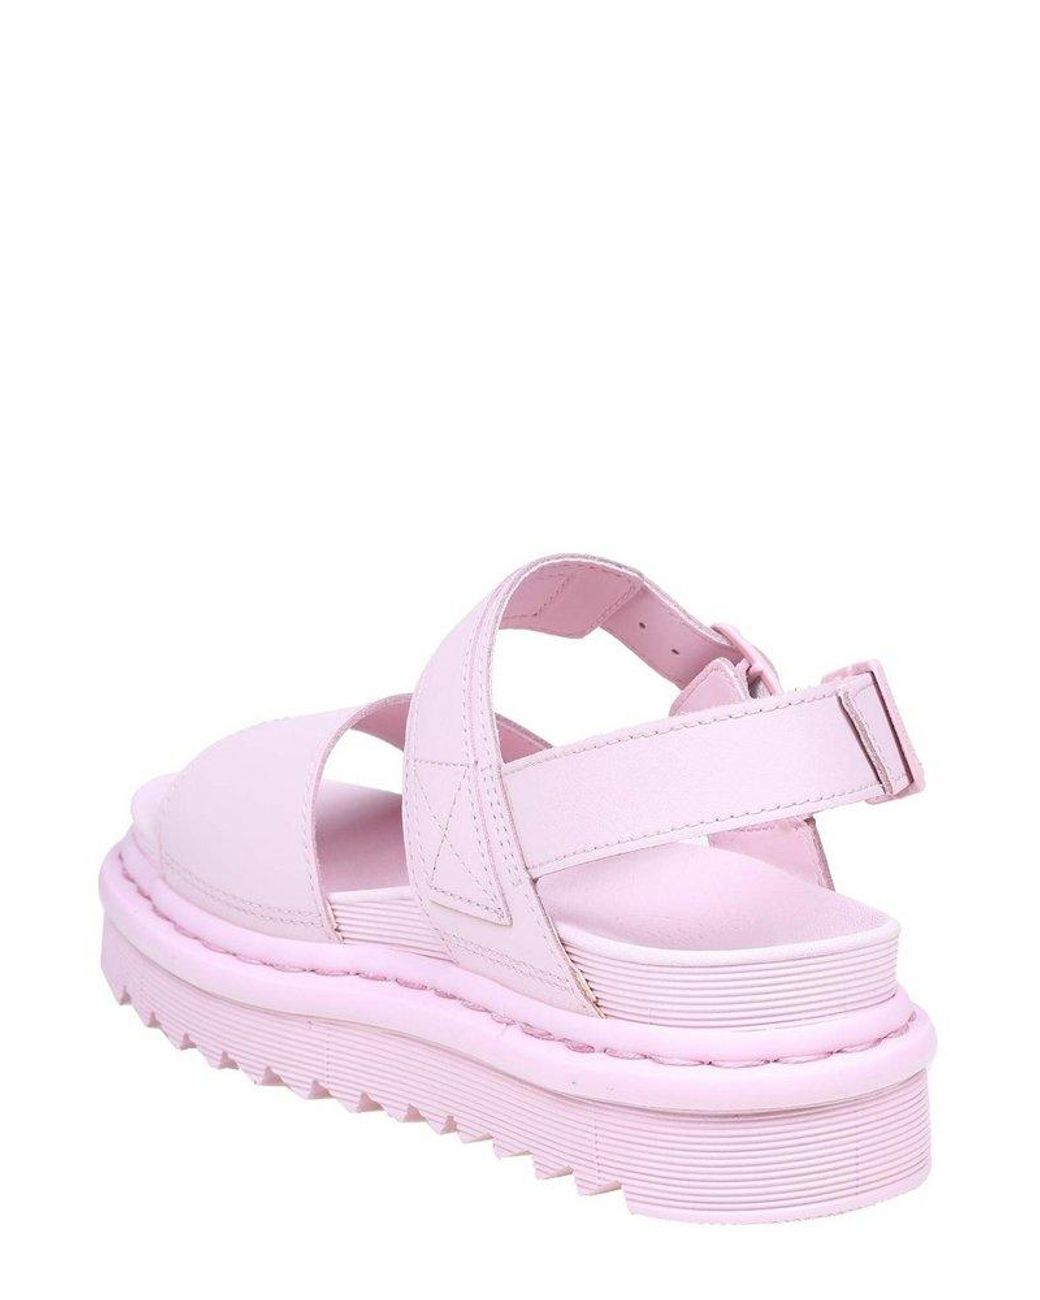 Dr. Martens Voss Mono Hydro Open-toe Sandals in Pink | Lyst